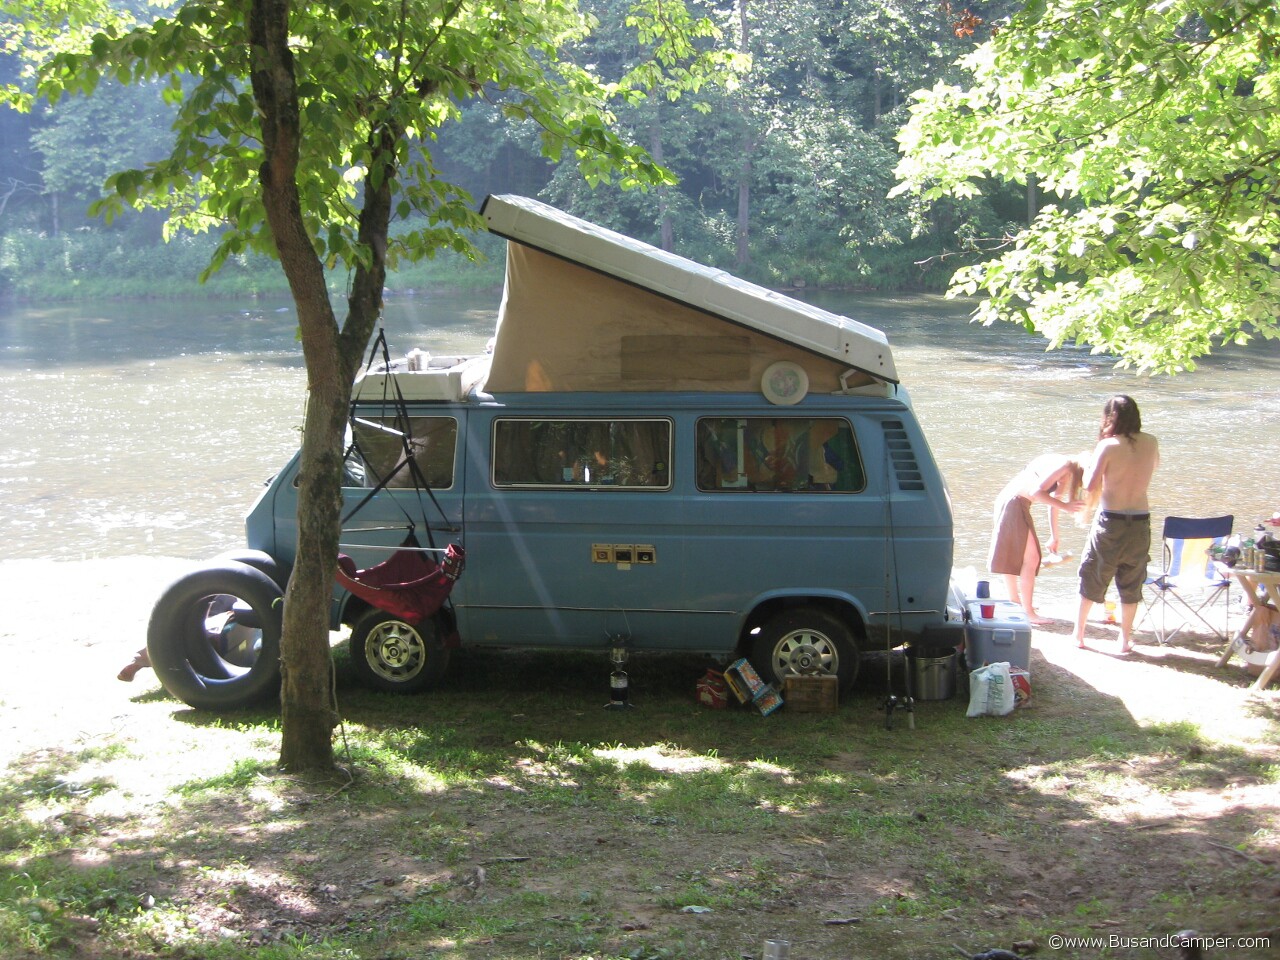 Perfect VW Campout setting